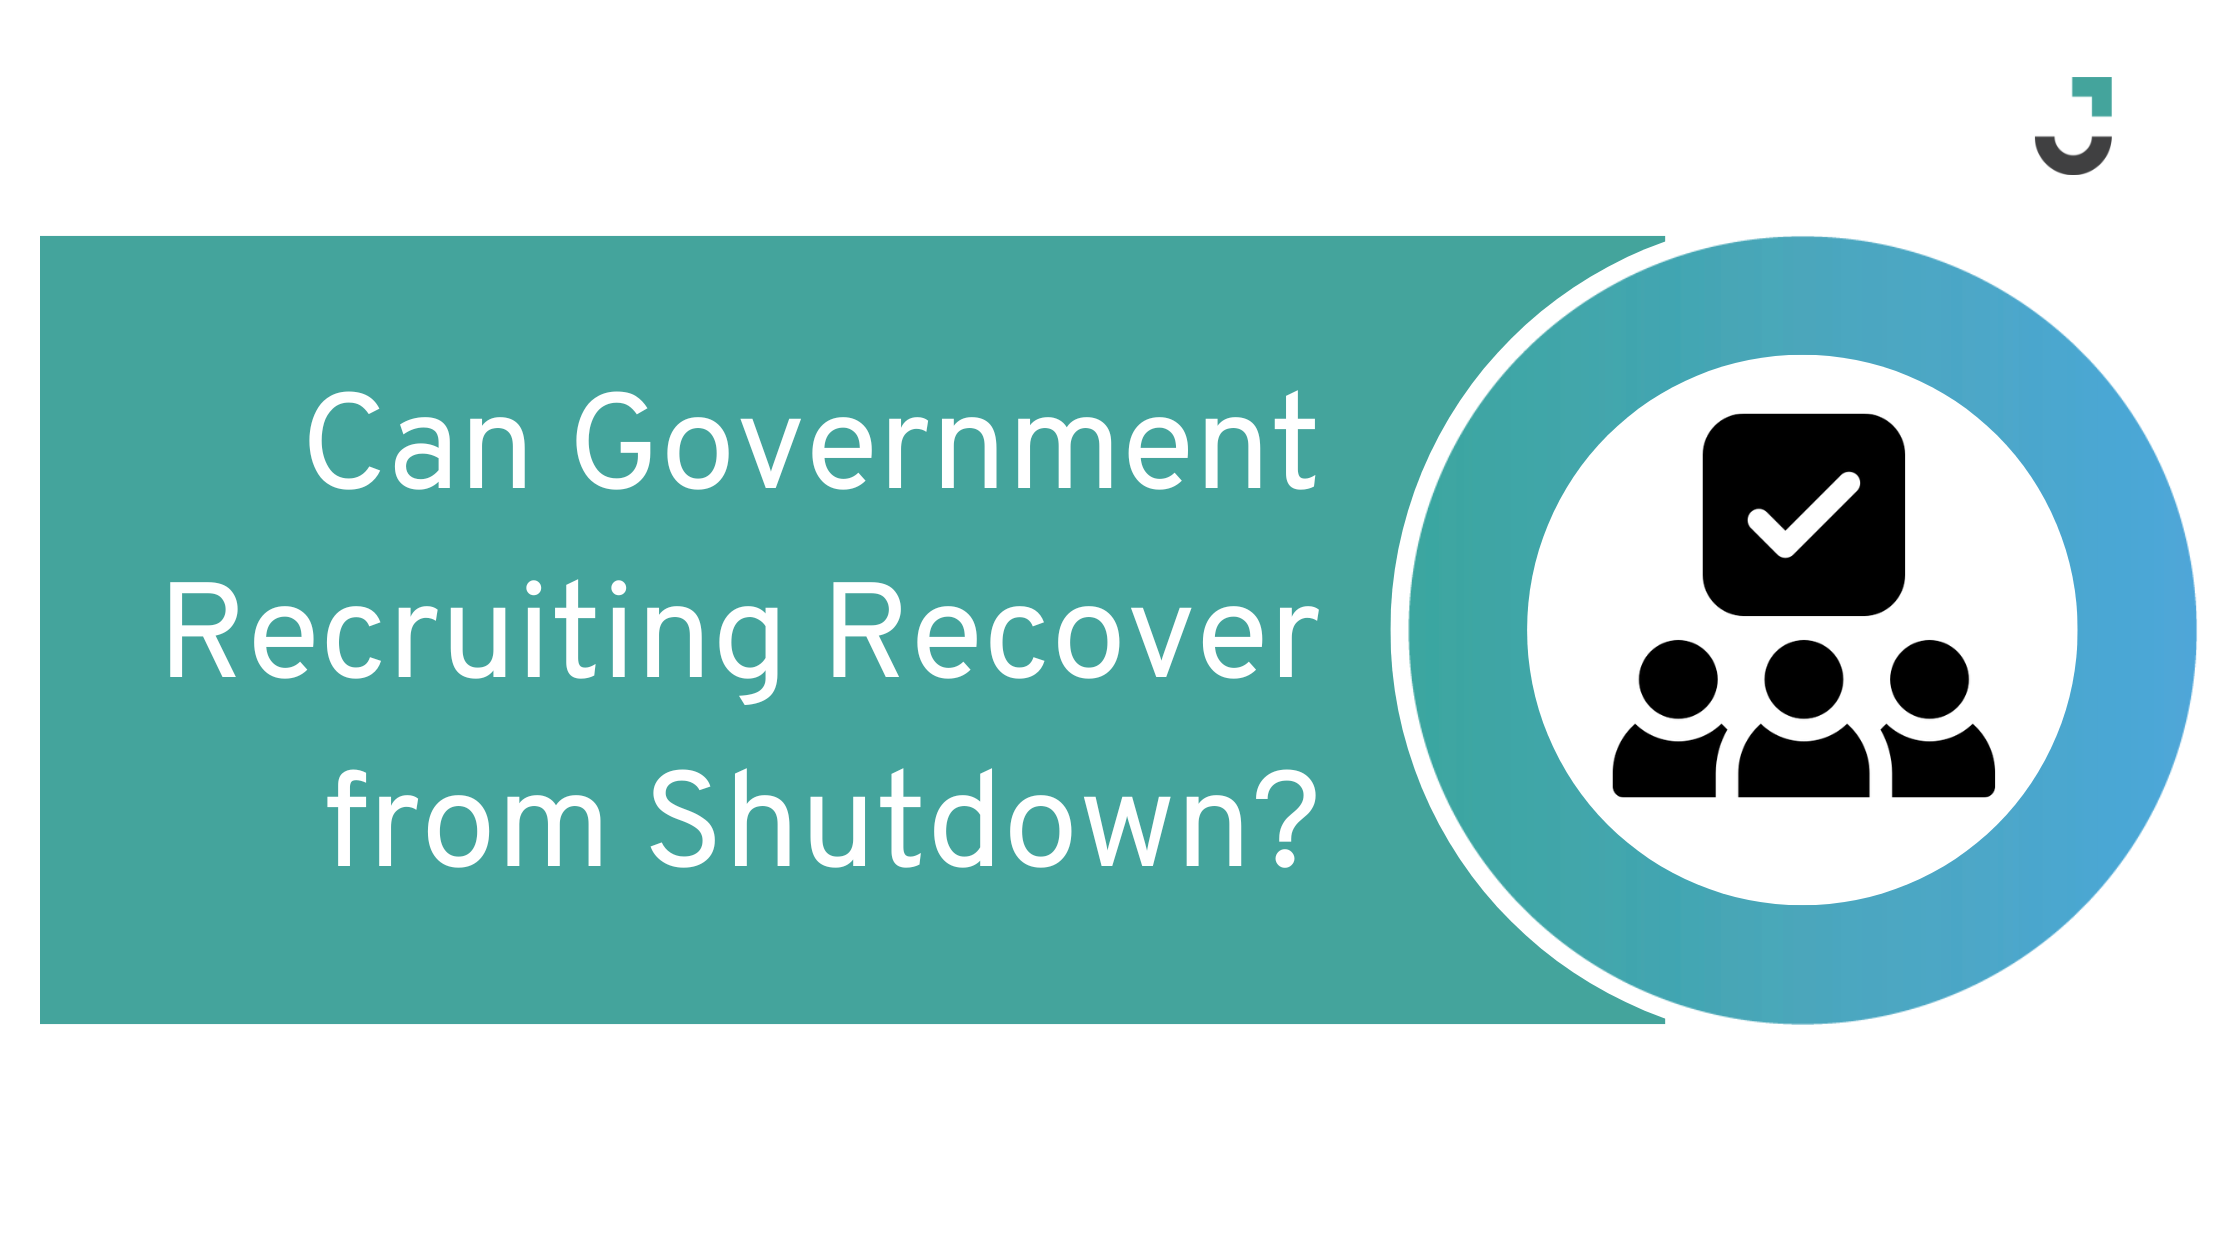 Can Government Recruiting Recover from Shutdown?